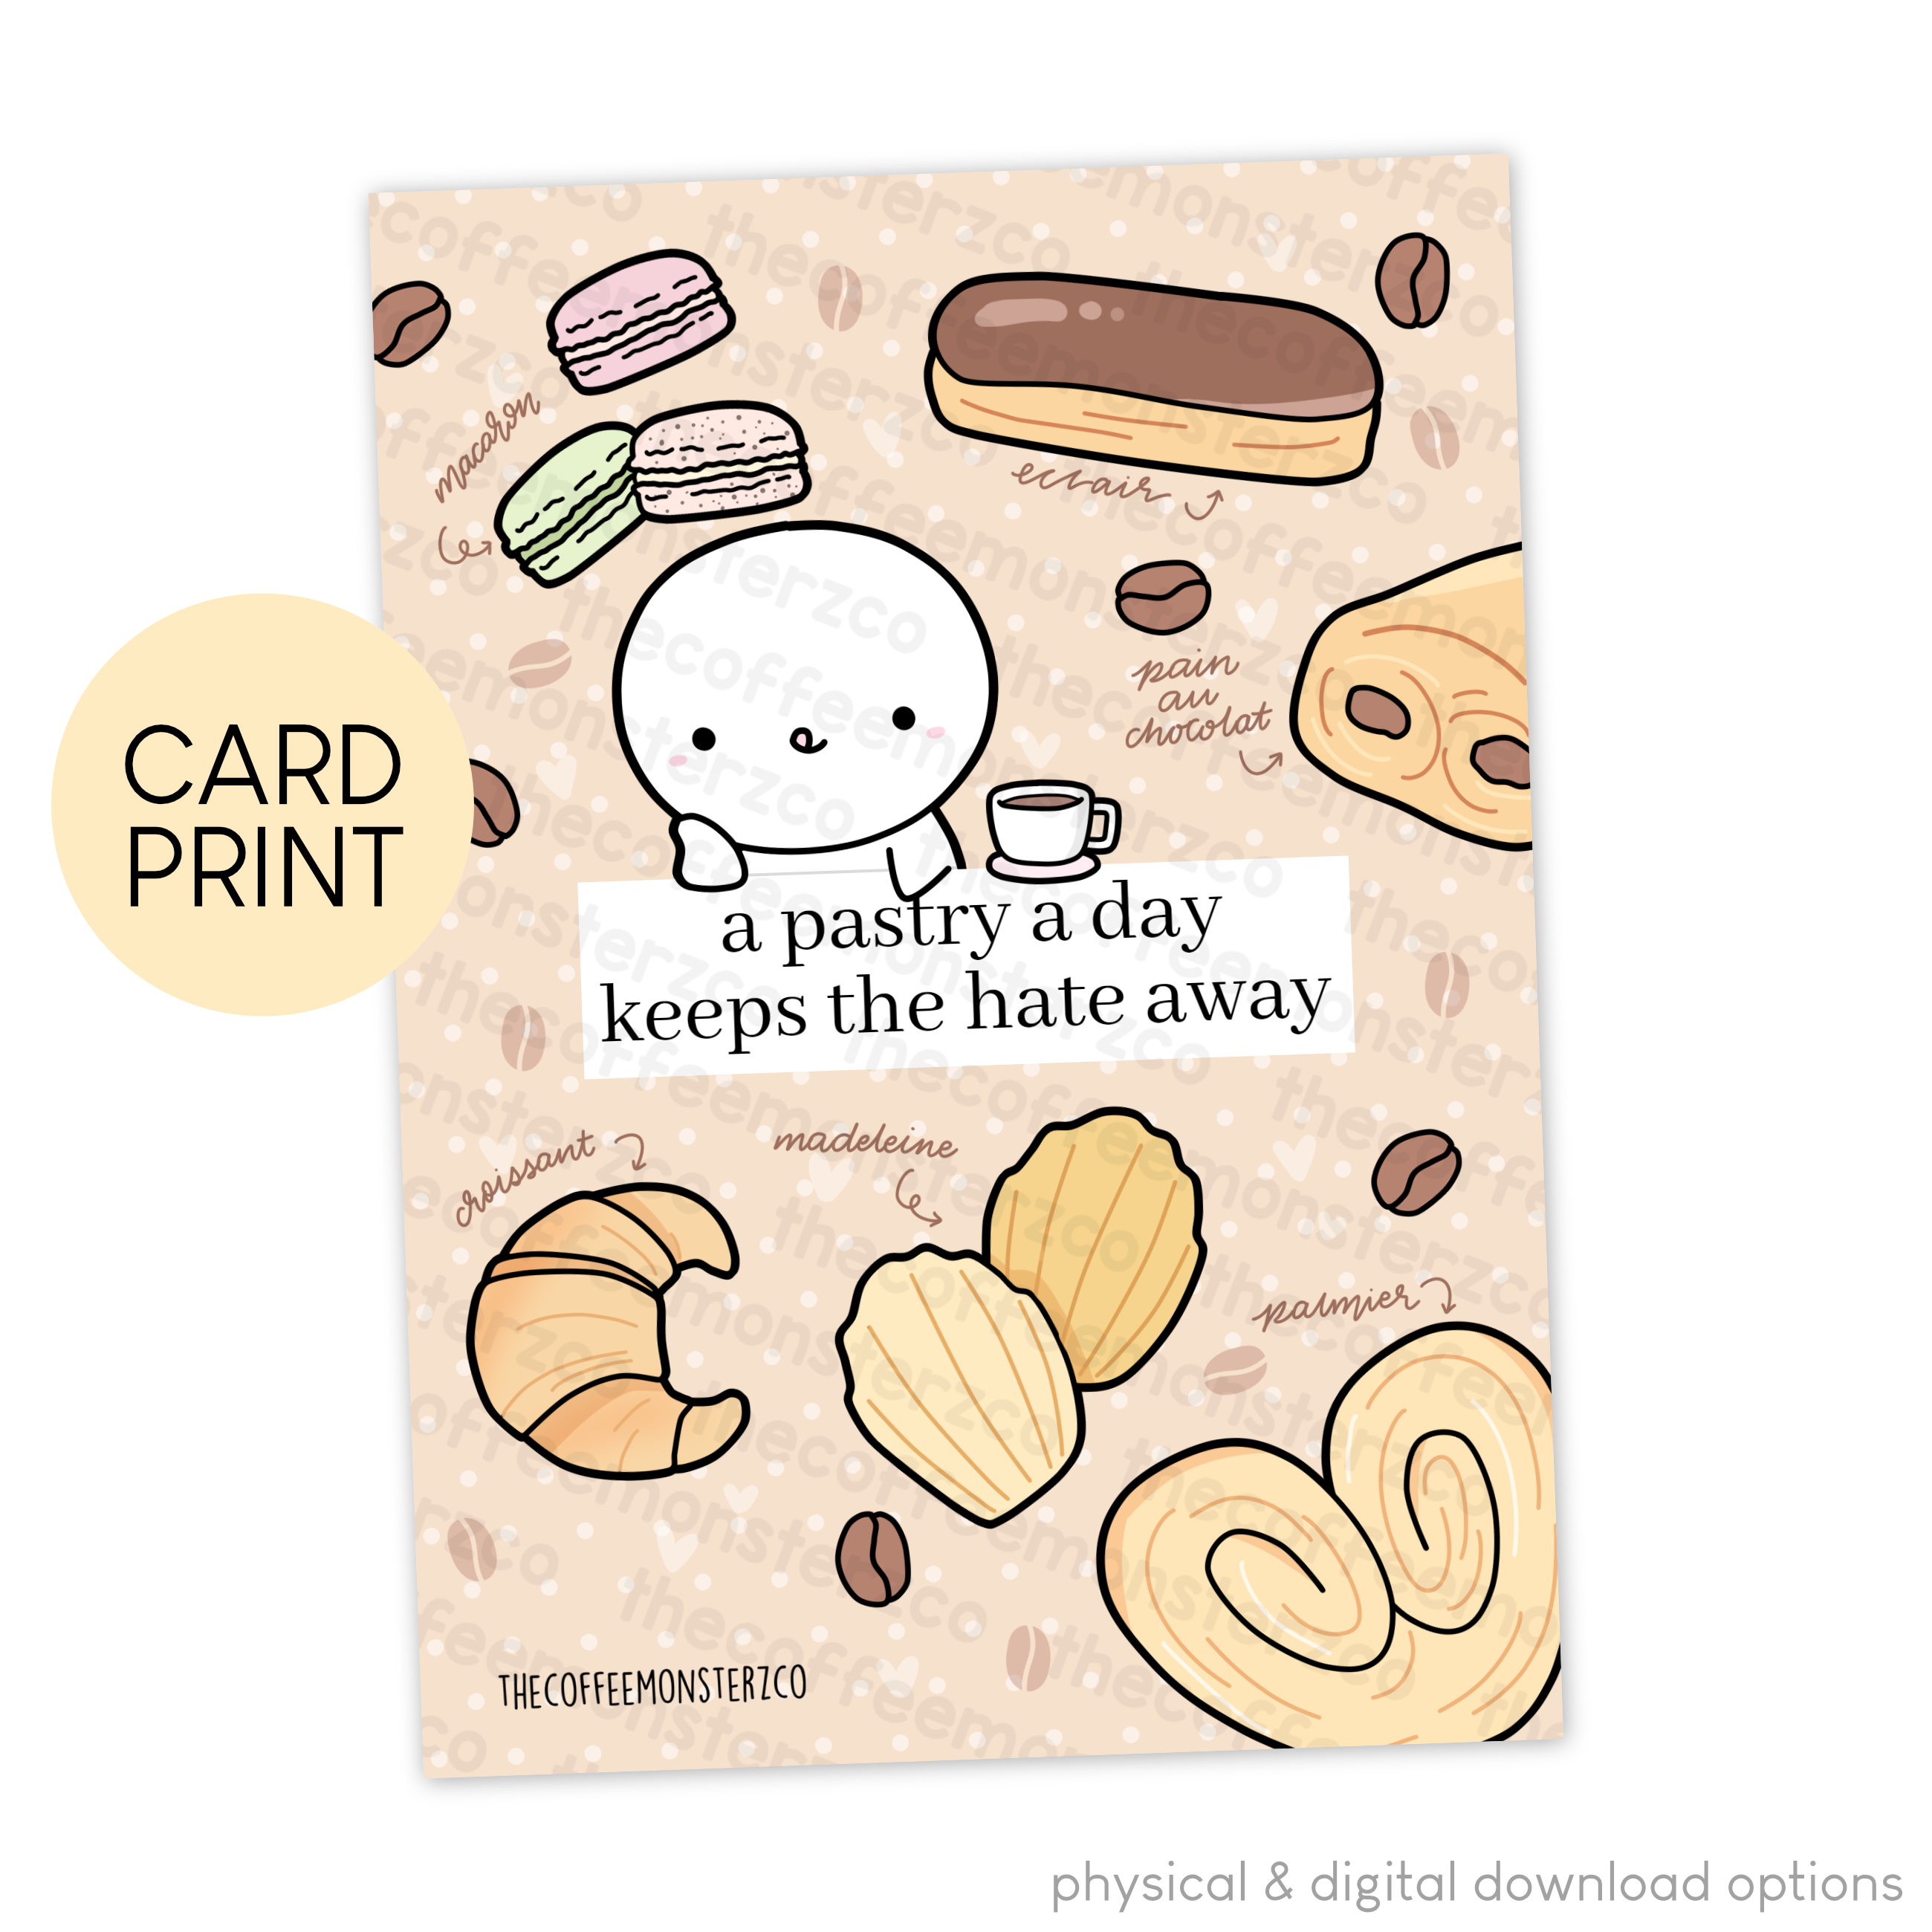 A Pastry A Day - Card Print